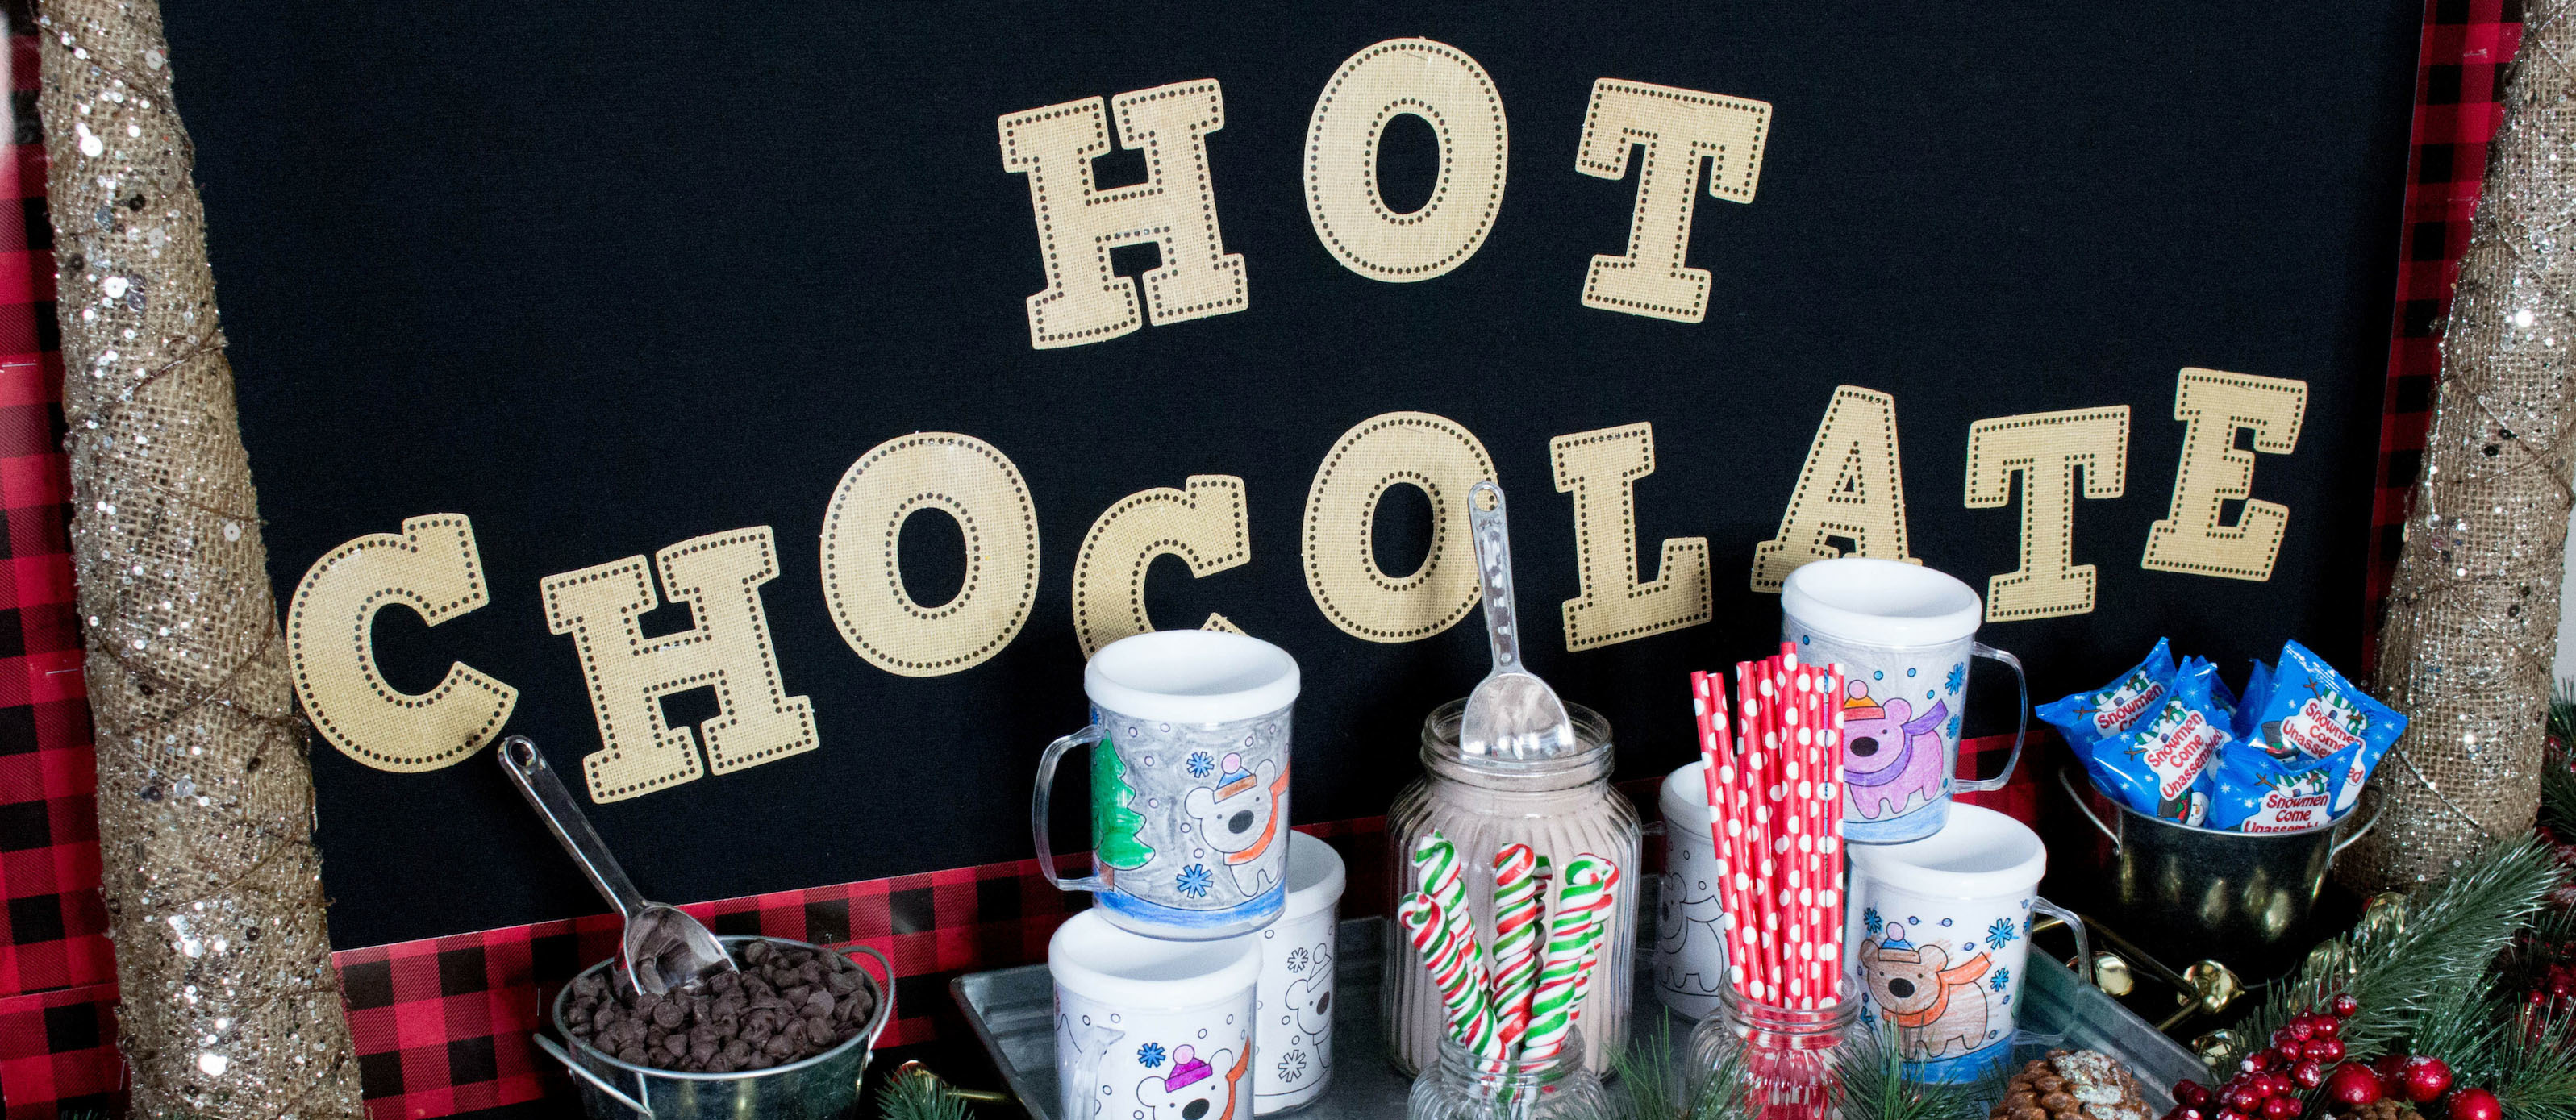 How to Make a Homemade Hot Chocolate Bar - Biscuits & Burlap